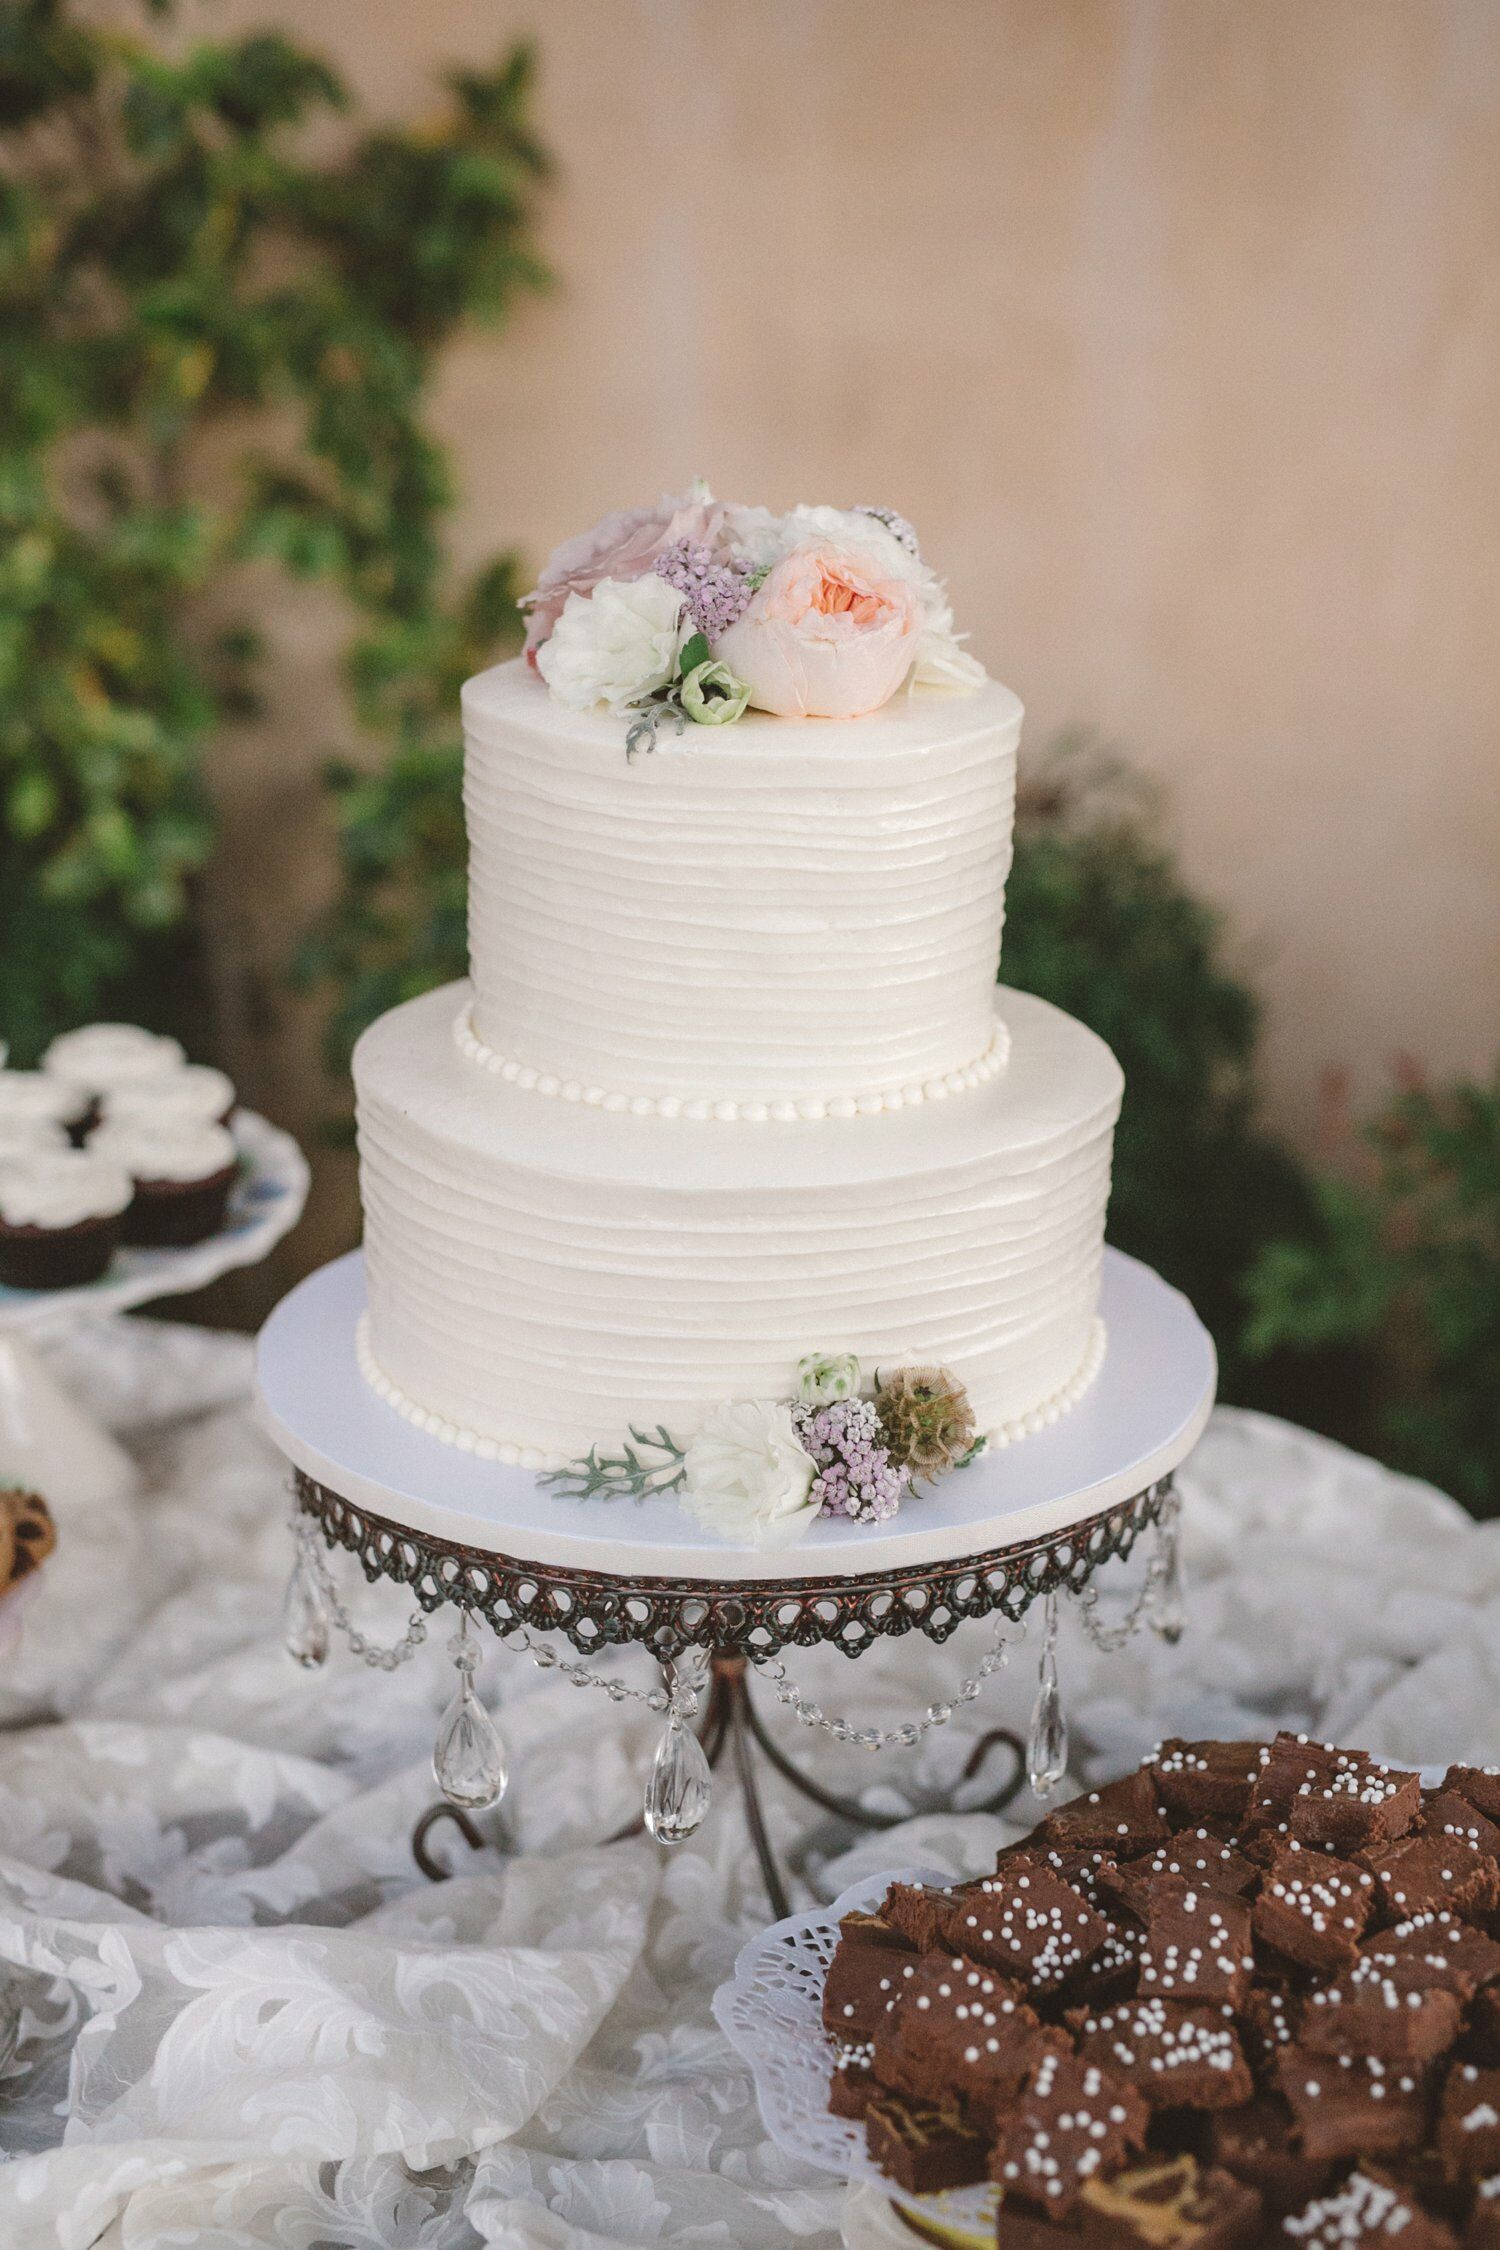 Simple Rustic Wedding Cakes
 Simple Rustic Wedding Cake and Dessert Table